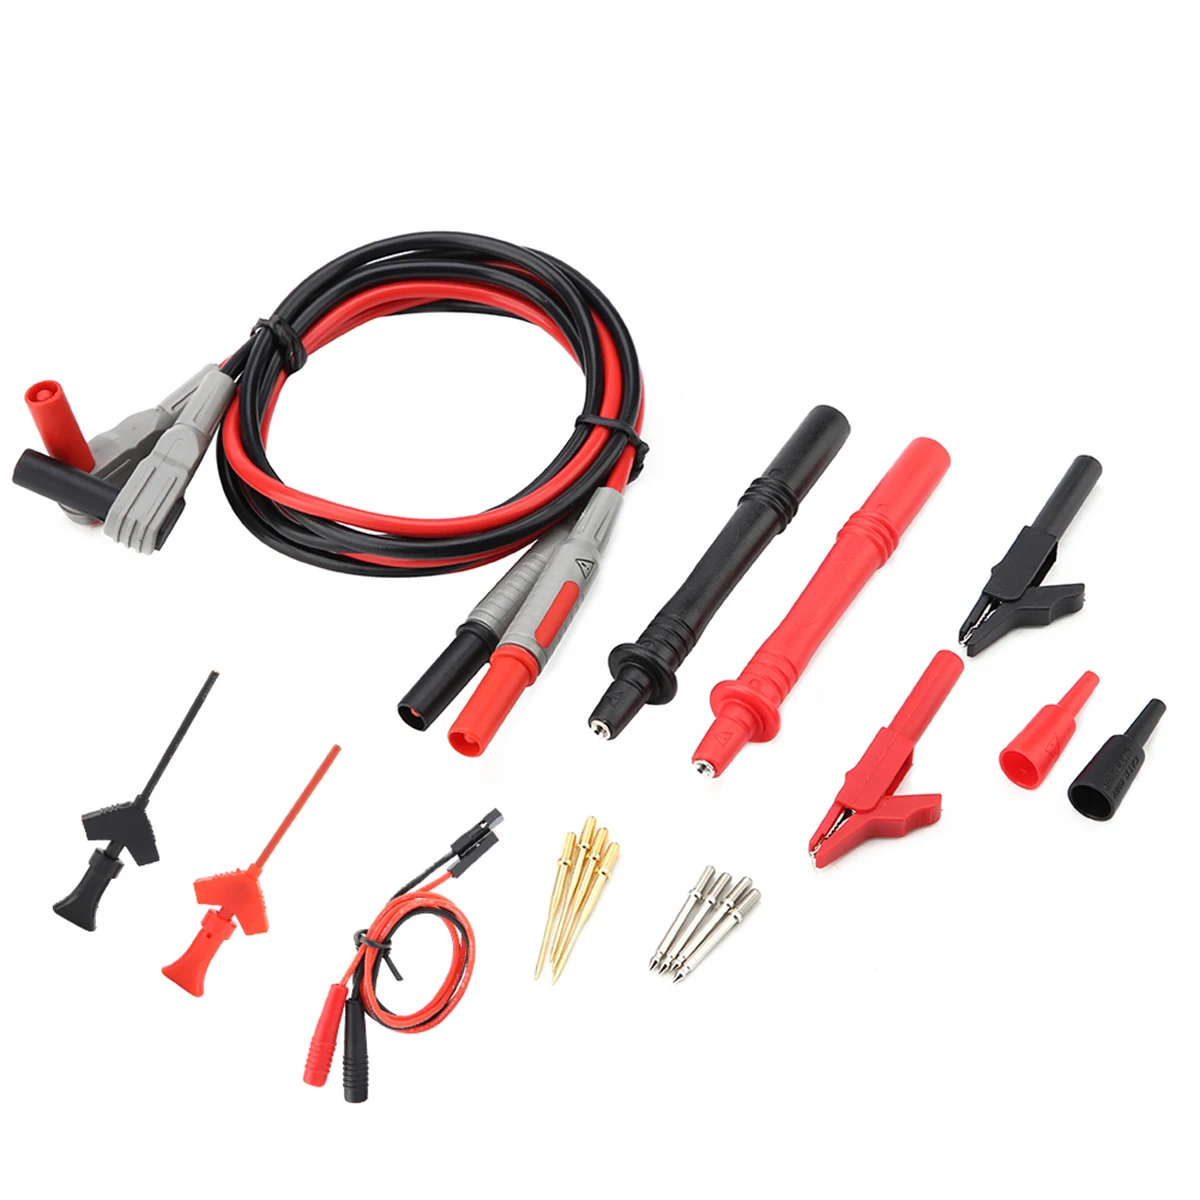 

P1300C Electronic Digital Multimeter Test Leads with Crocodile Clips Replaceable Probe Tips Set